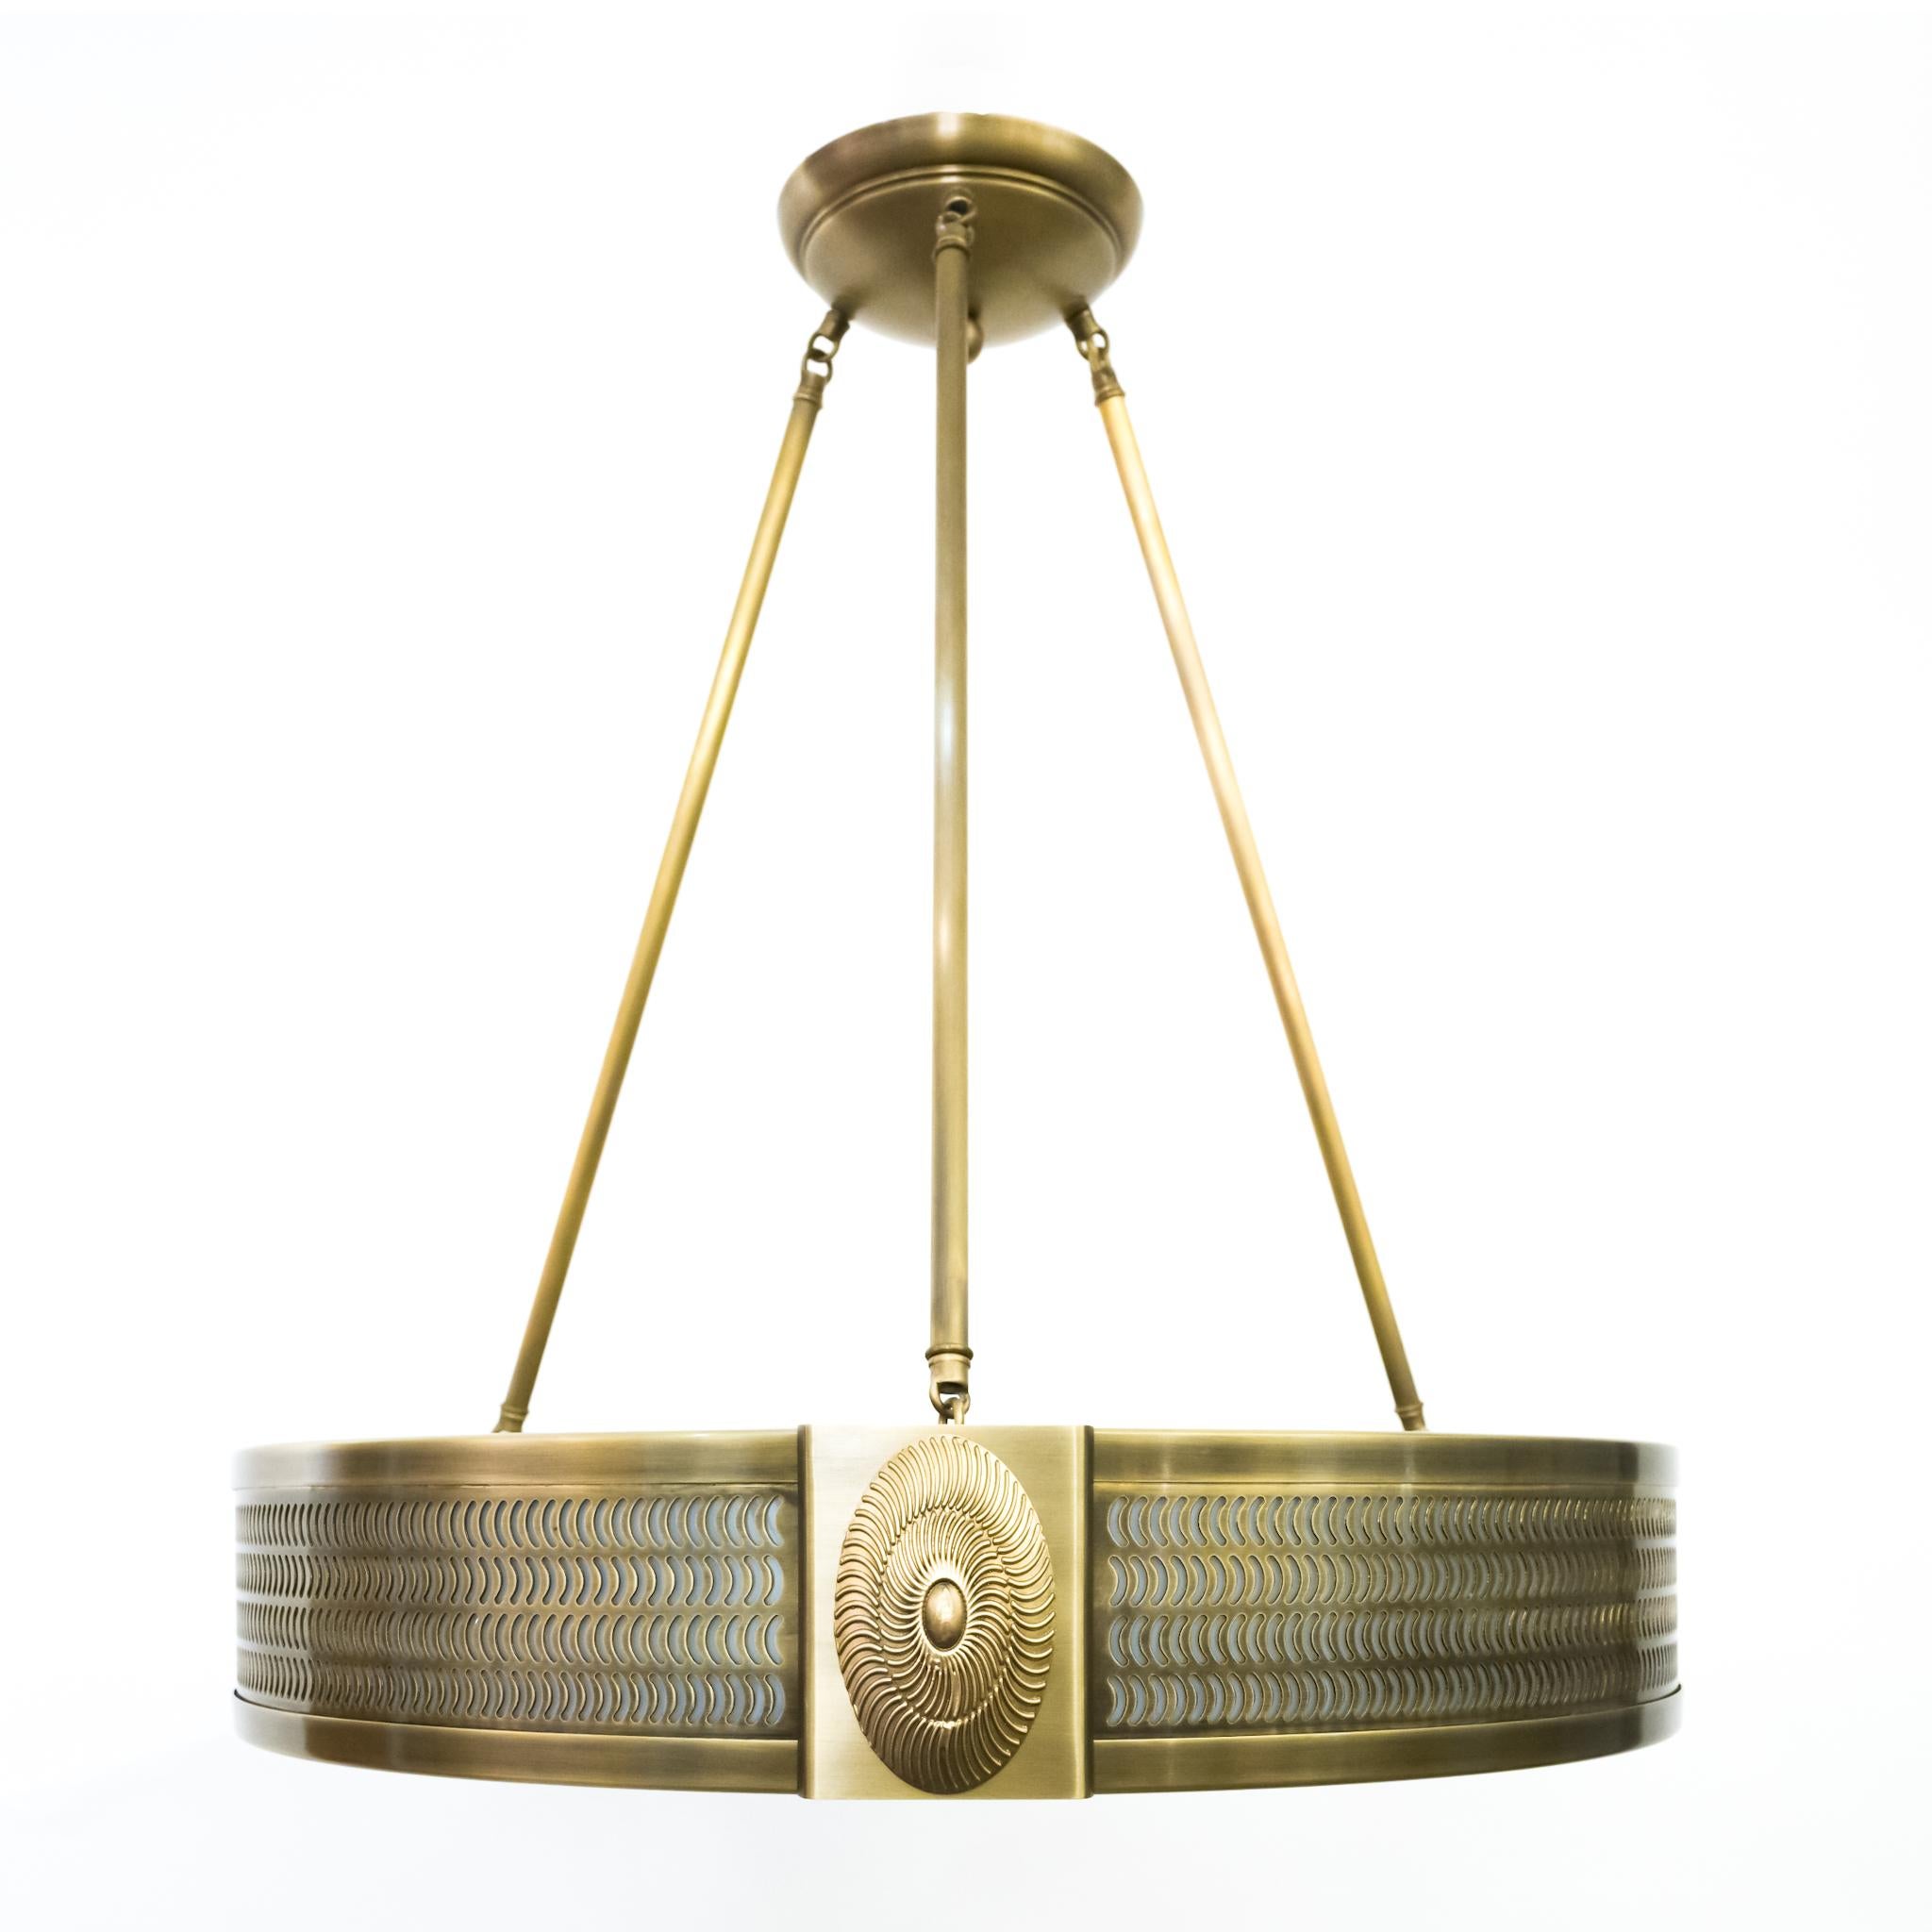 A new, contemporary pendant ceiling light with comma-shaped cutouts emitting light through opal lucite diffusers on the sides. The frame divided in three sections with cast brass oval rosettes. The underside with optical Tourbillon Swirl design in